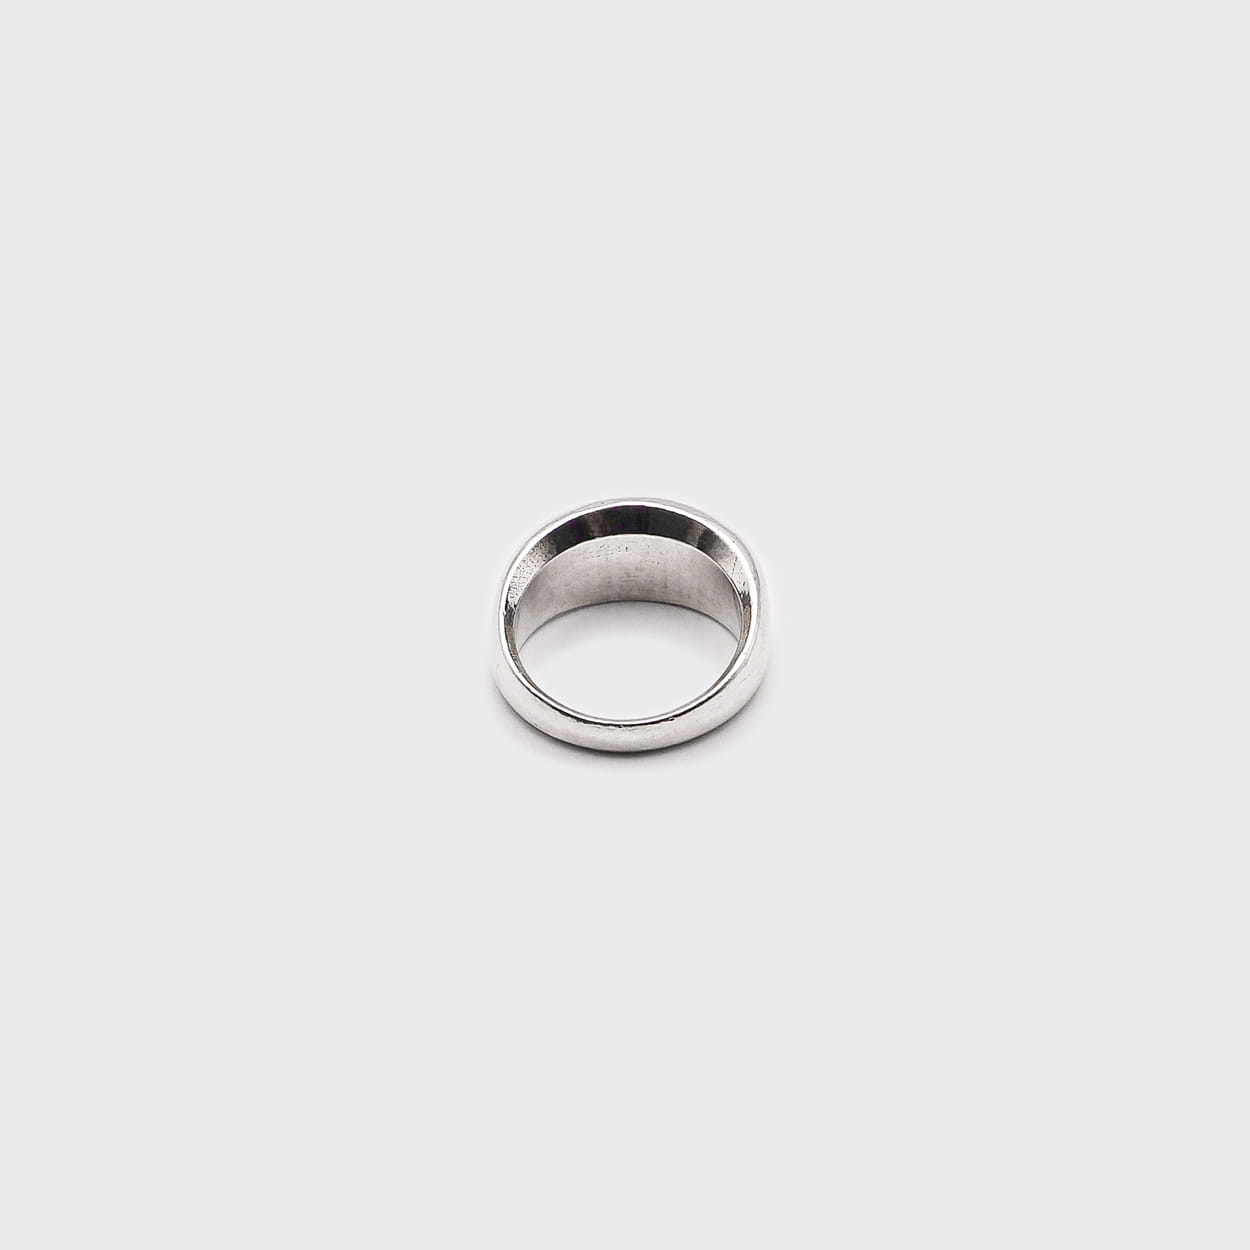 Atelier Domingo's Classic silver ring is made in Spain. This unisex ring is for both men and women. This jewelry is made of a high-quality 925 Sterling silver plating (10 microns). Stay with the Classics.